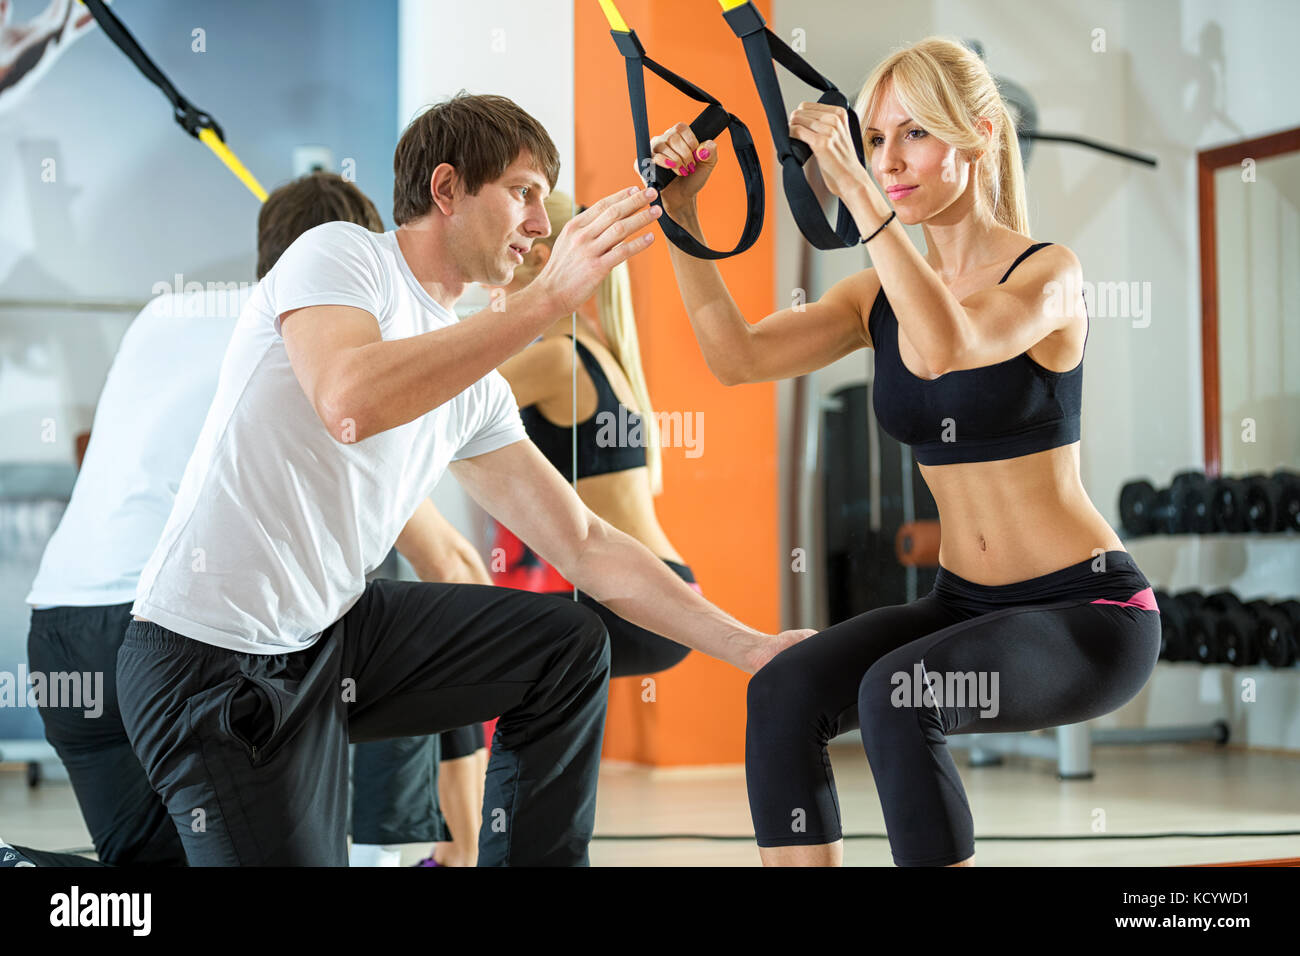 attractive woman doing suspension training with fitness straps Stock Photo